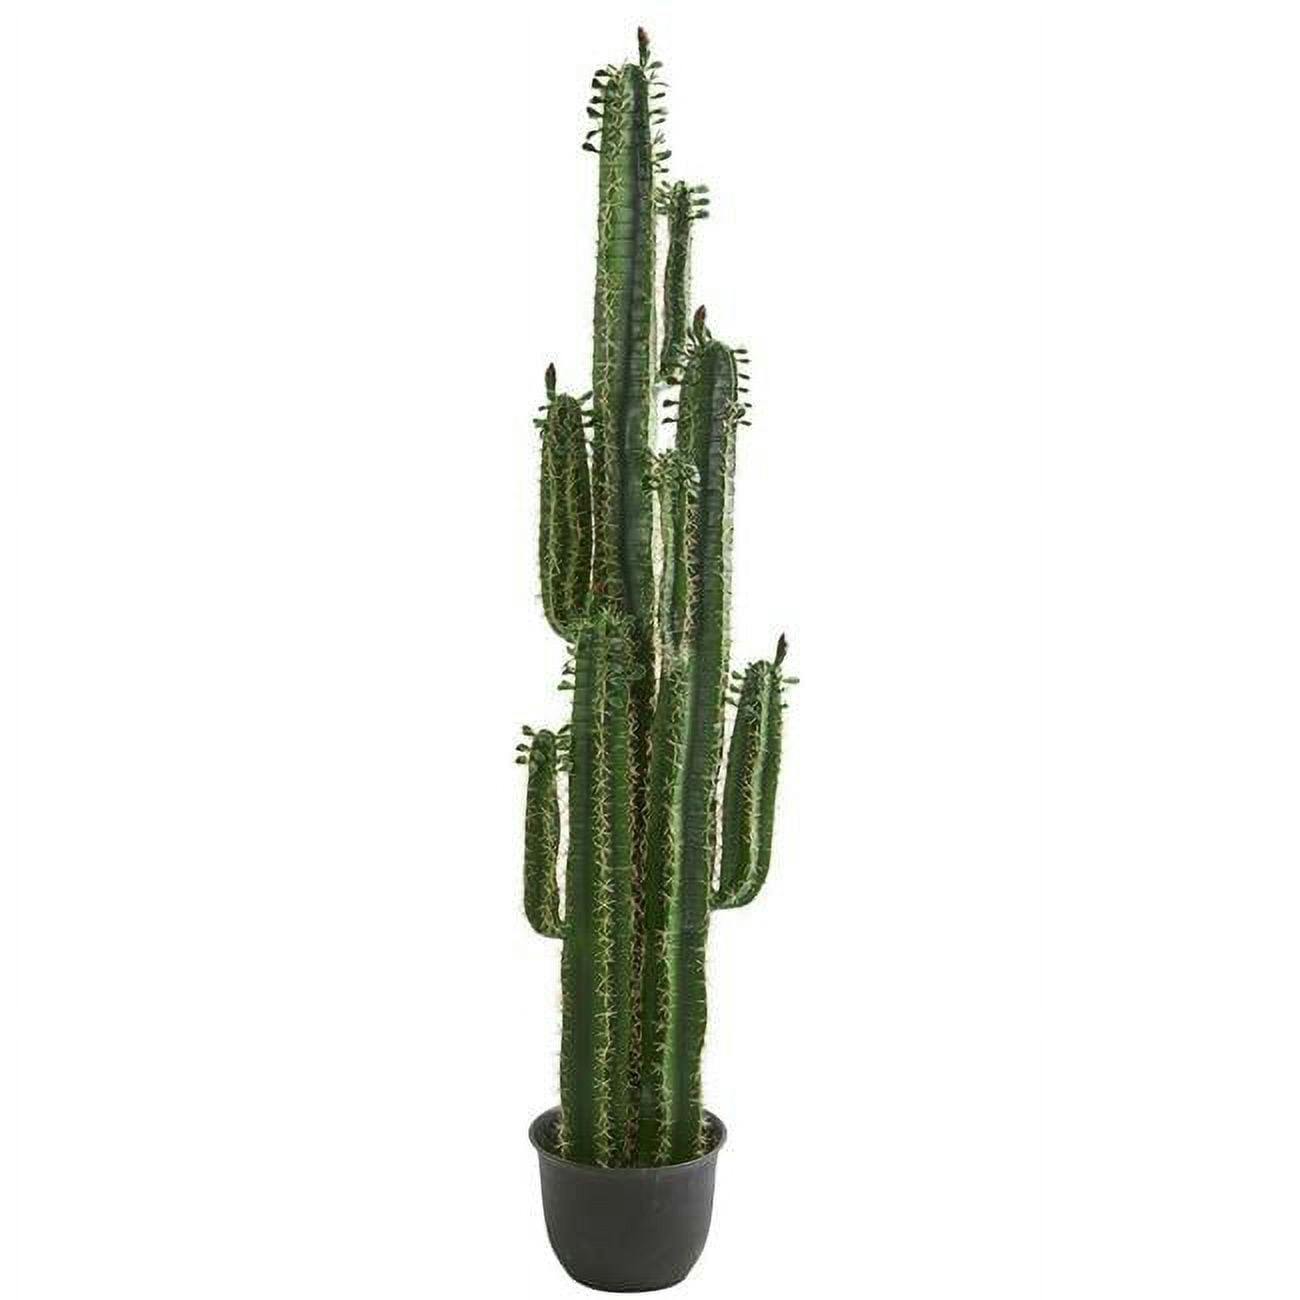 Lifelike Green Spined 6.5-ft Outdoor Potted Cactus